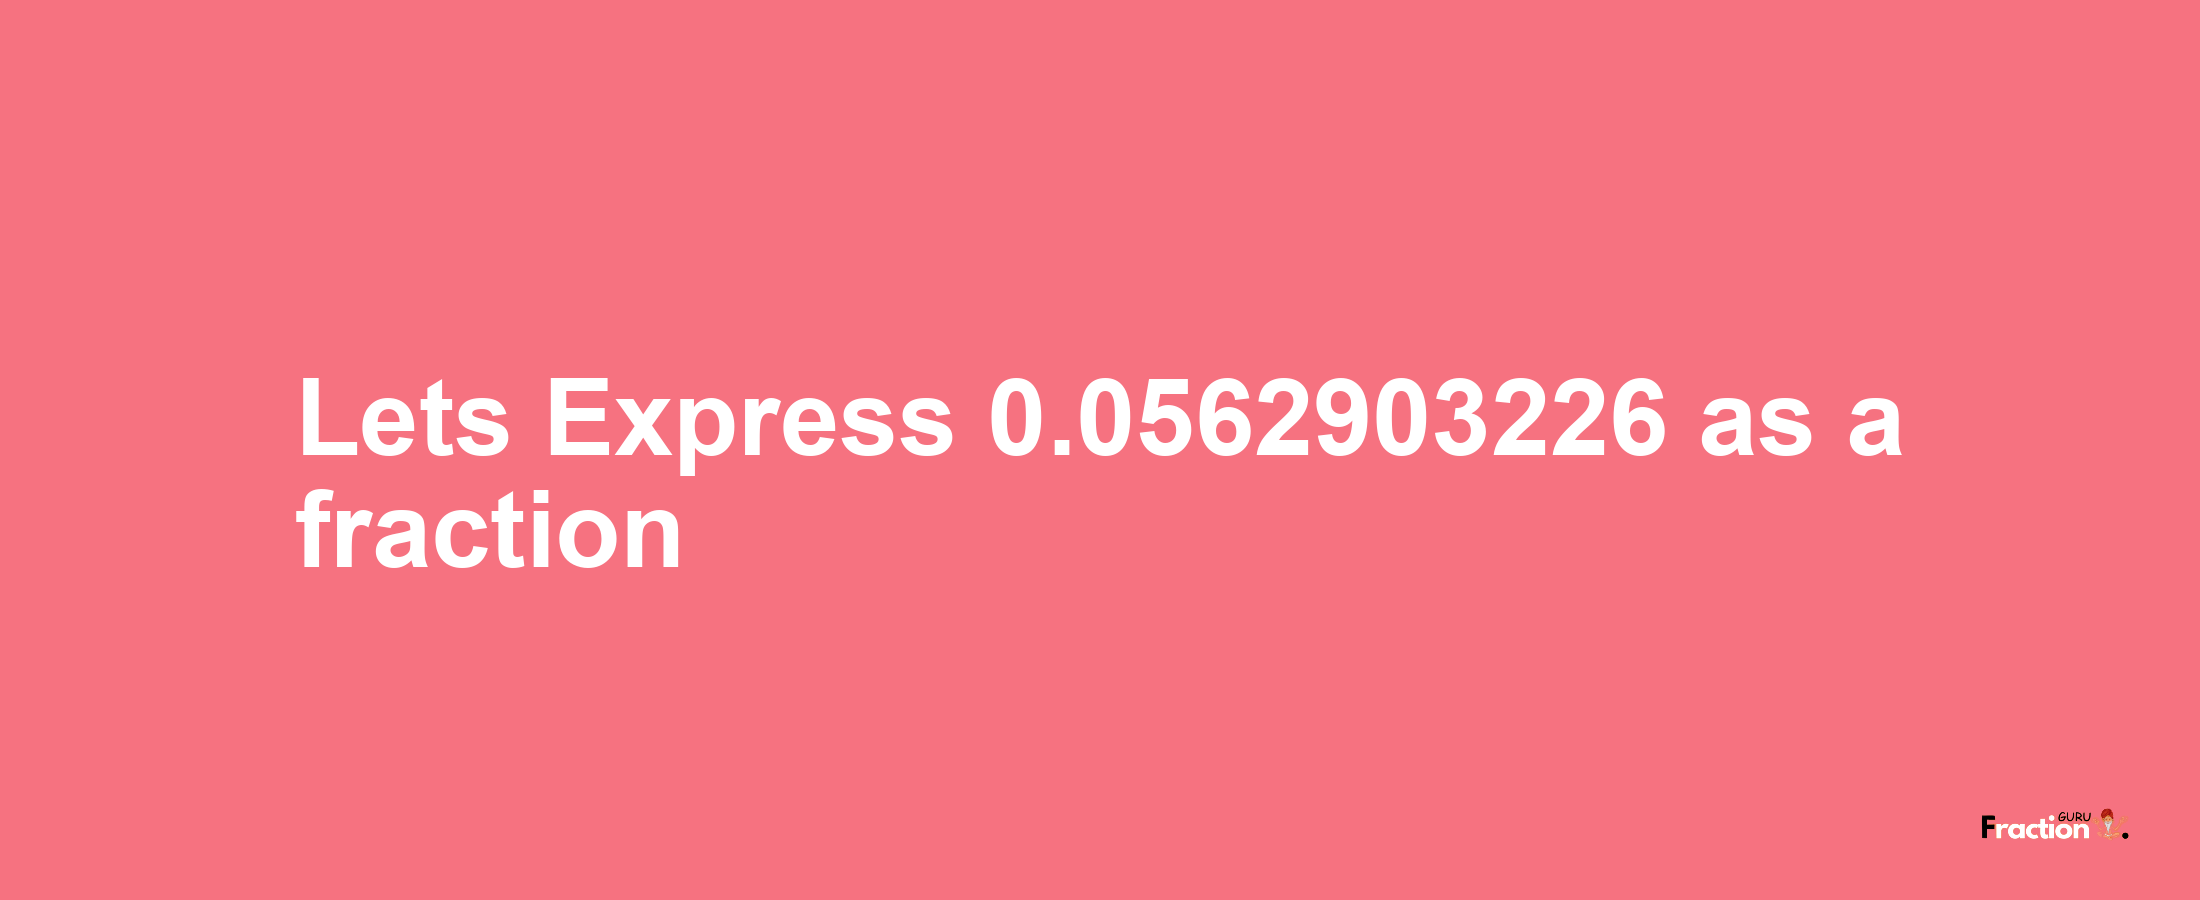 Lets Express 0.0562903226 as afraction